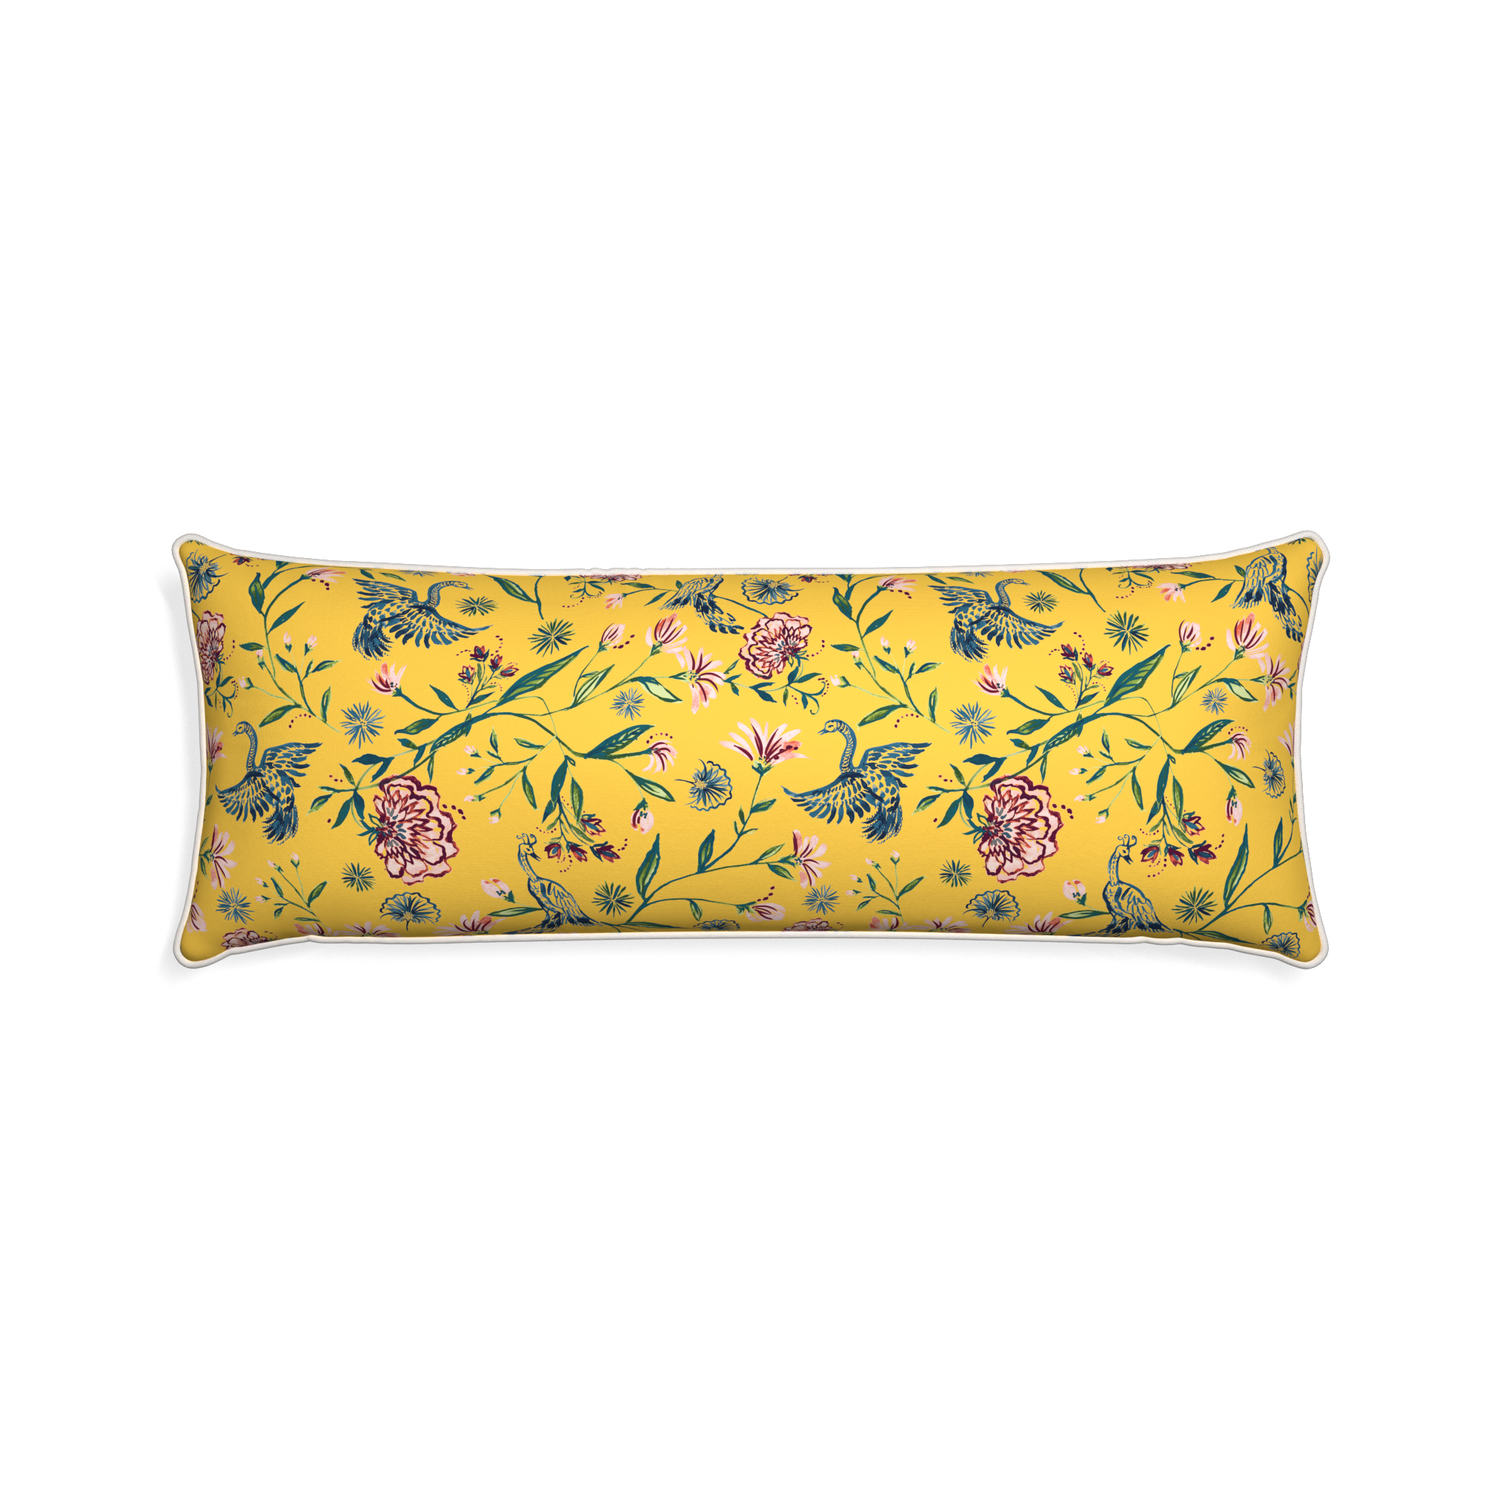 Xl-lumbar daphne canary custom pillow with snow piping on white background